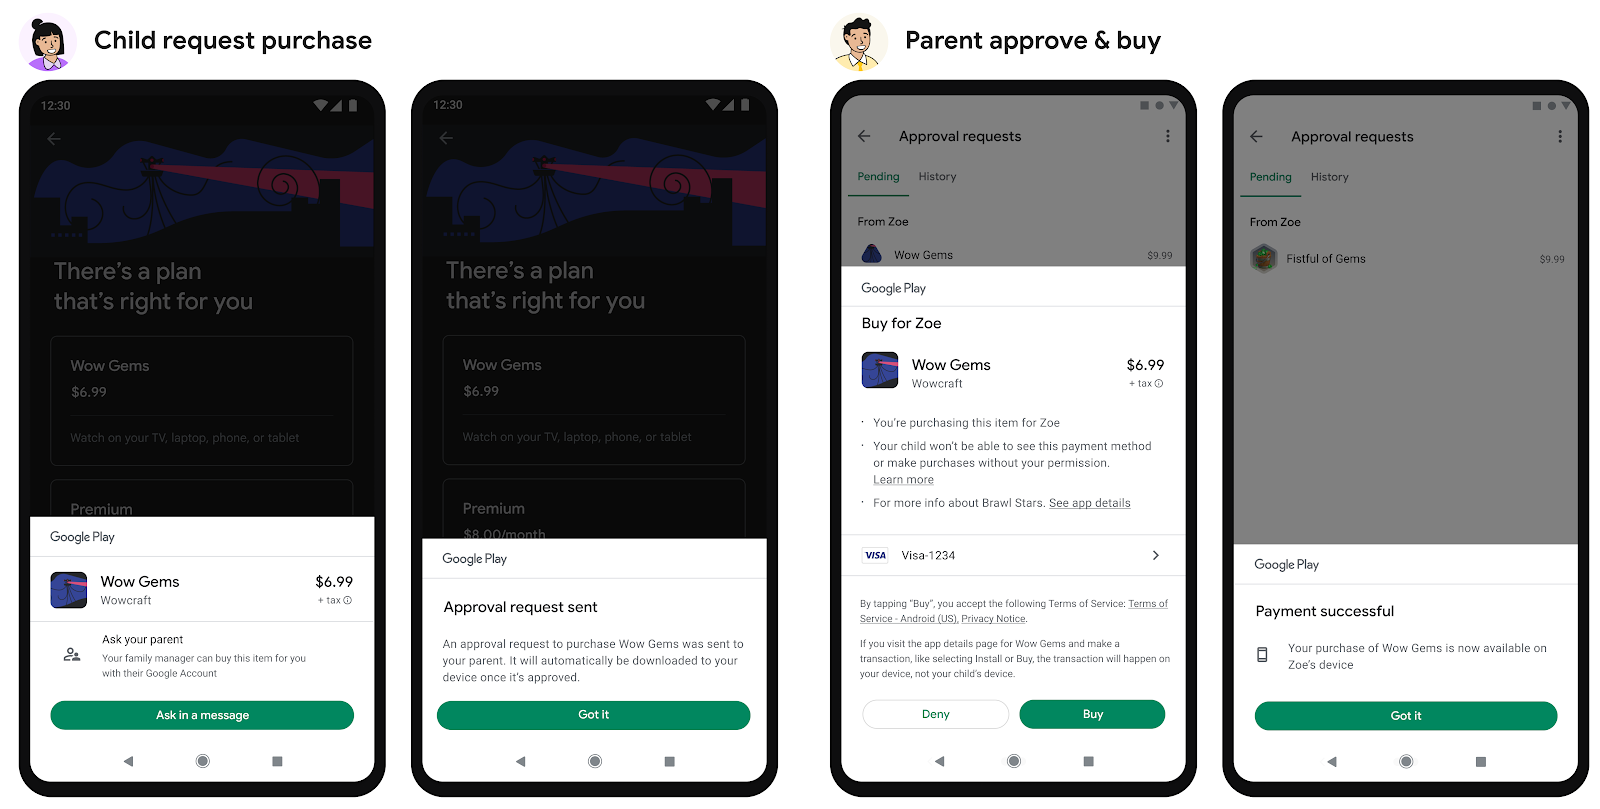 Process of requesting and approving a purchase in kids app on Google Play 